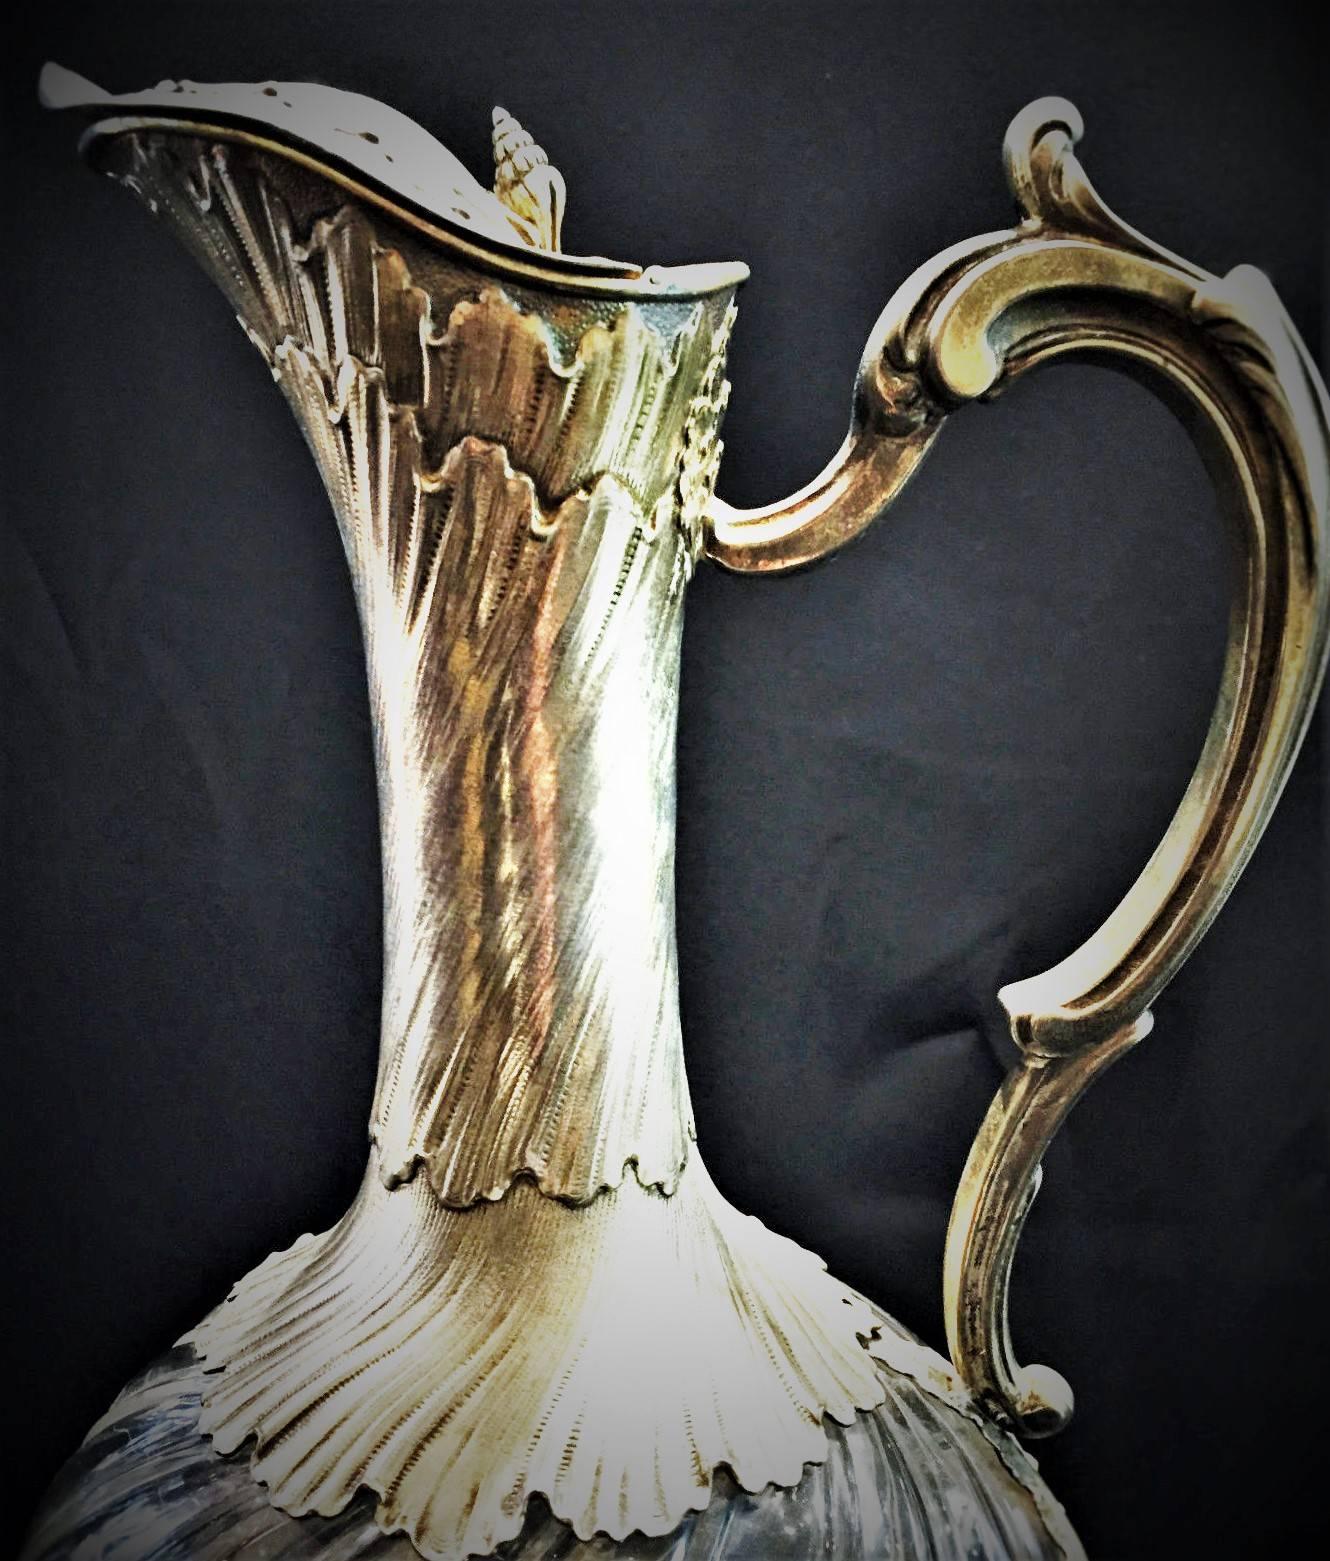 Early 20th Century Maison Odiot Paris, French Art Nouveau Rock Crystal and Silver Claret Jug